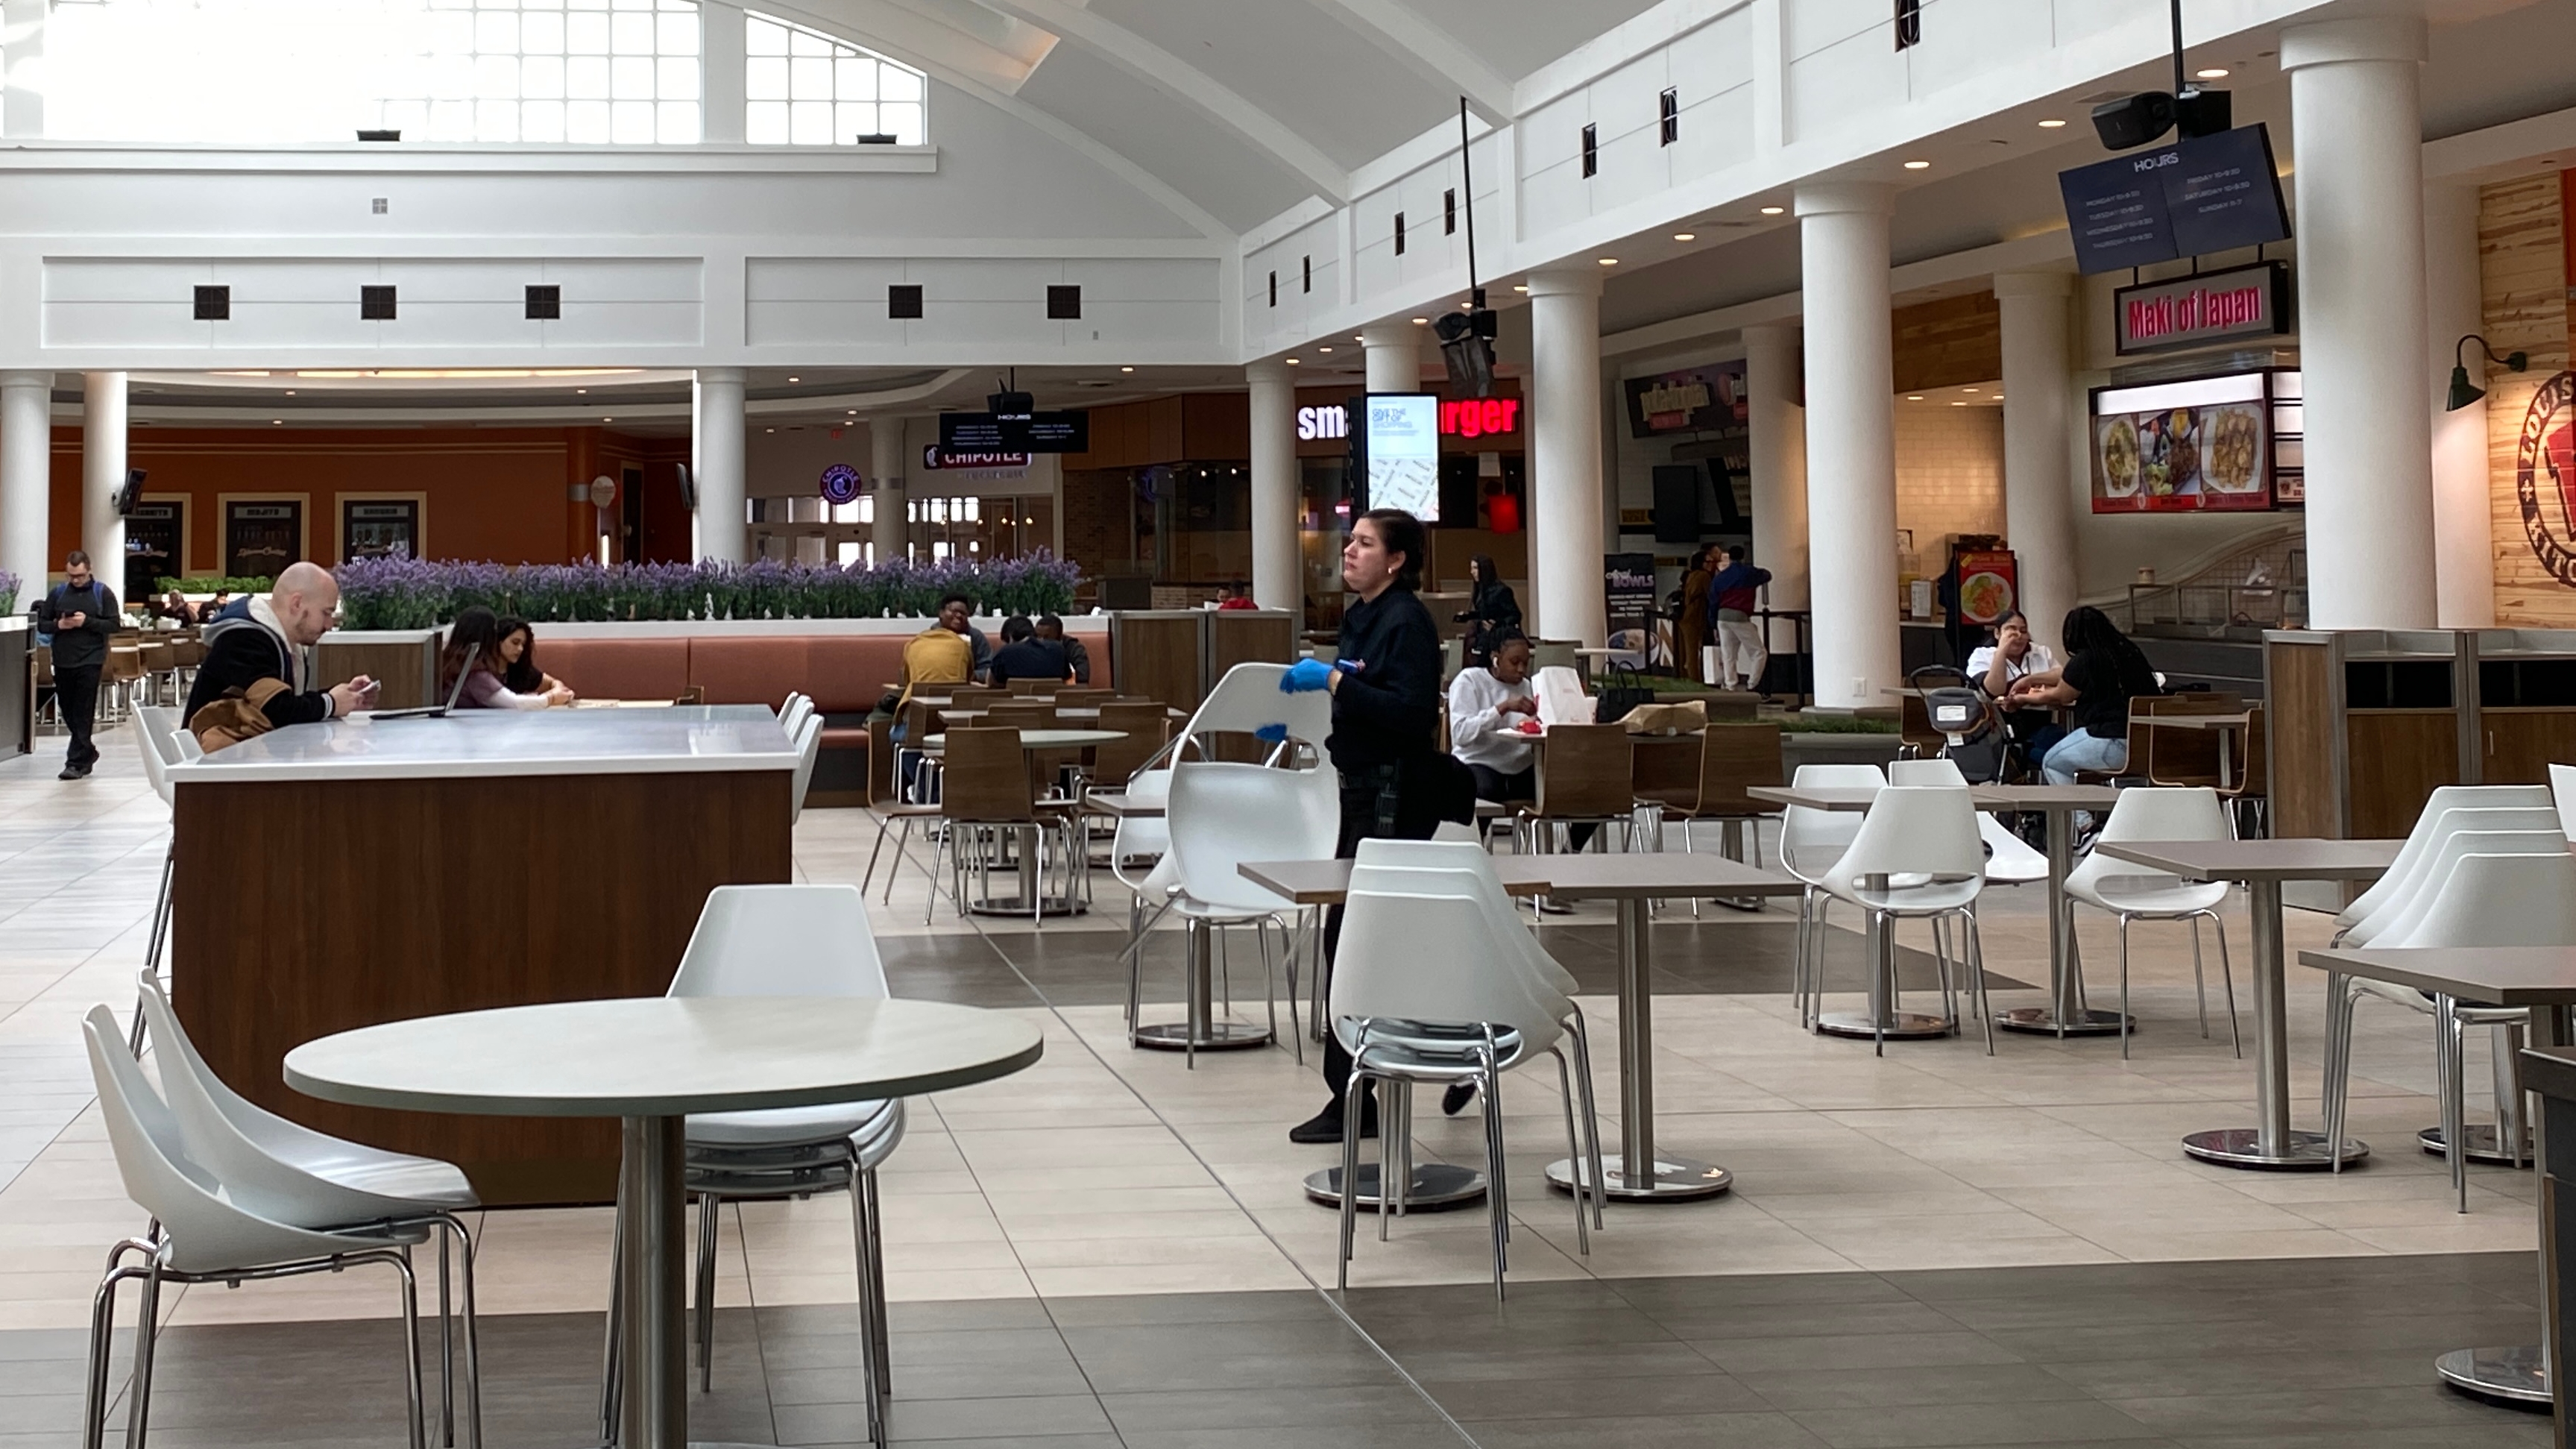 Mall shoppers may soon be able to order food court delivery 